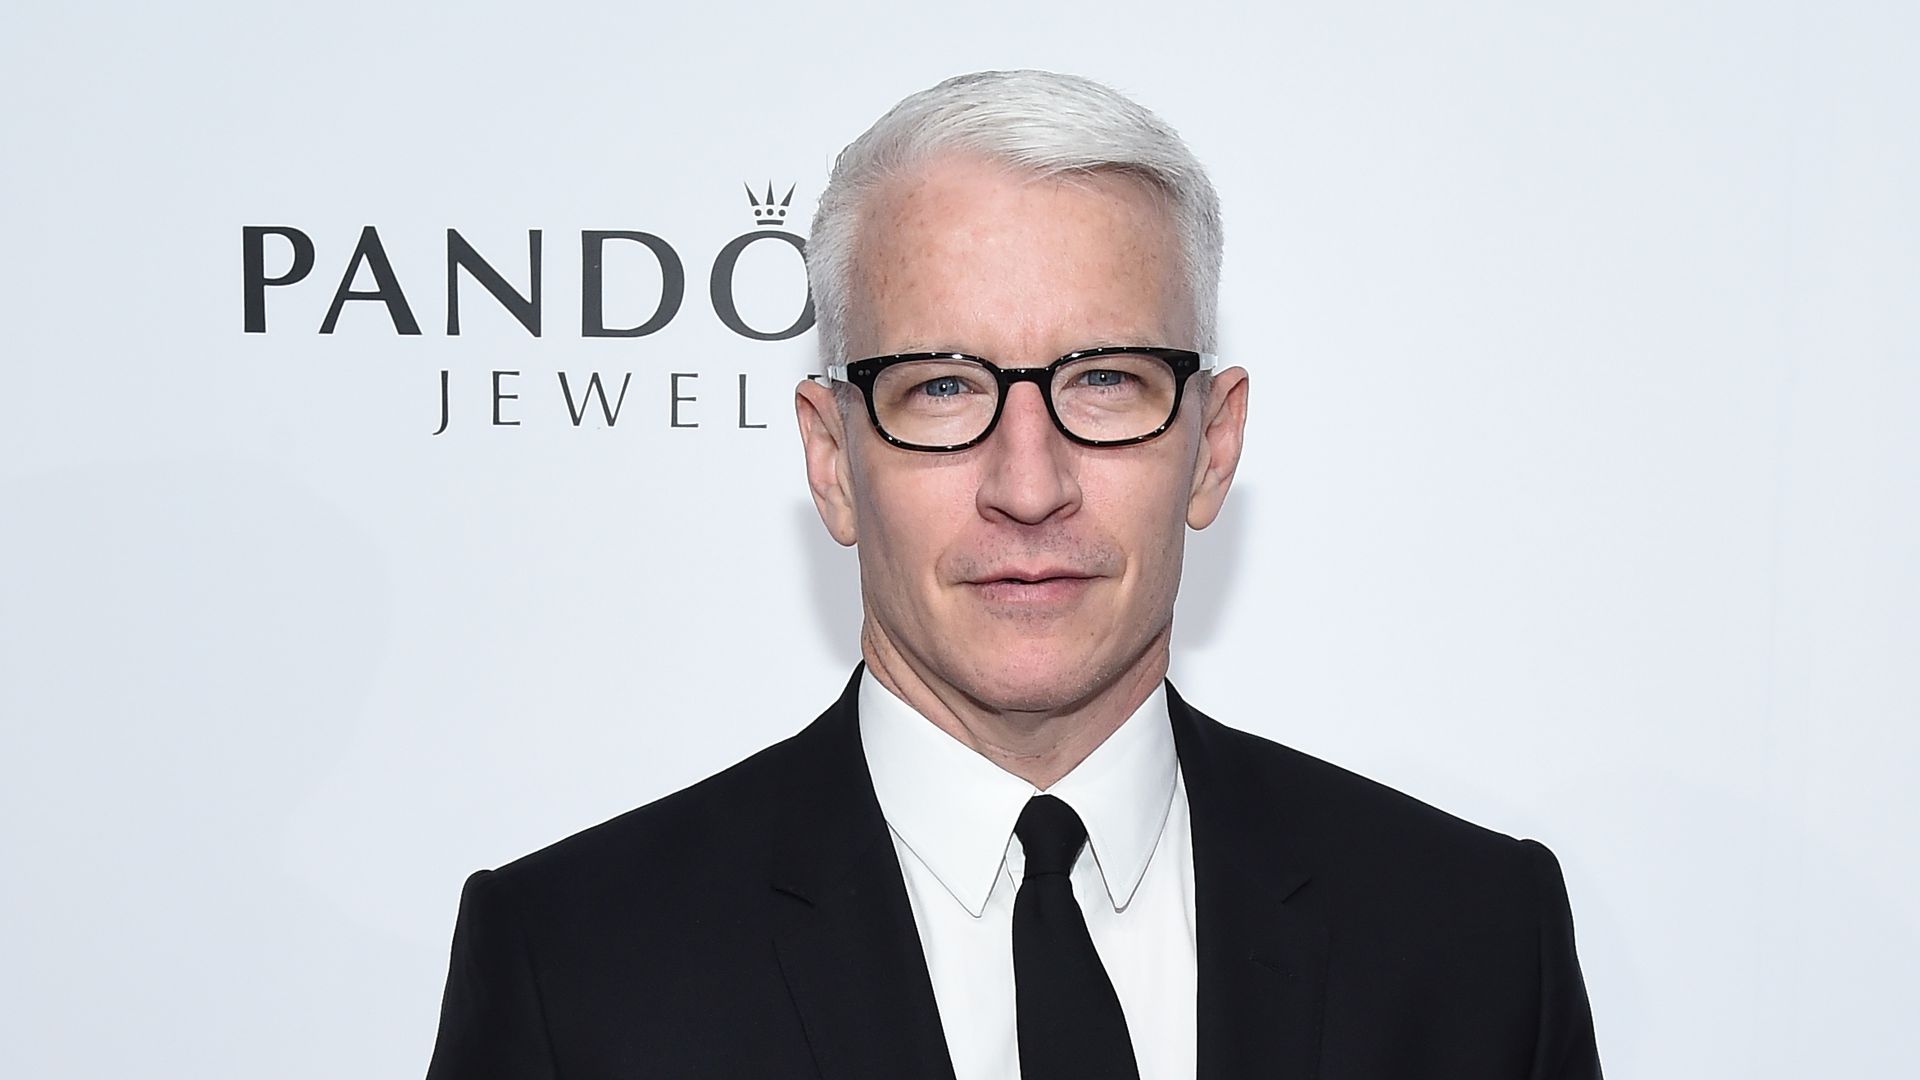 Anderson Cooper attends Billboard Women In Music 2016 Airing December 12th On Lifetime at Pier 36 on December 9, 2016 in New York City